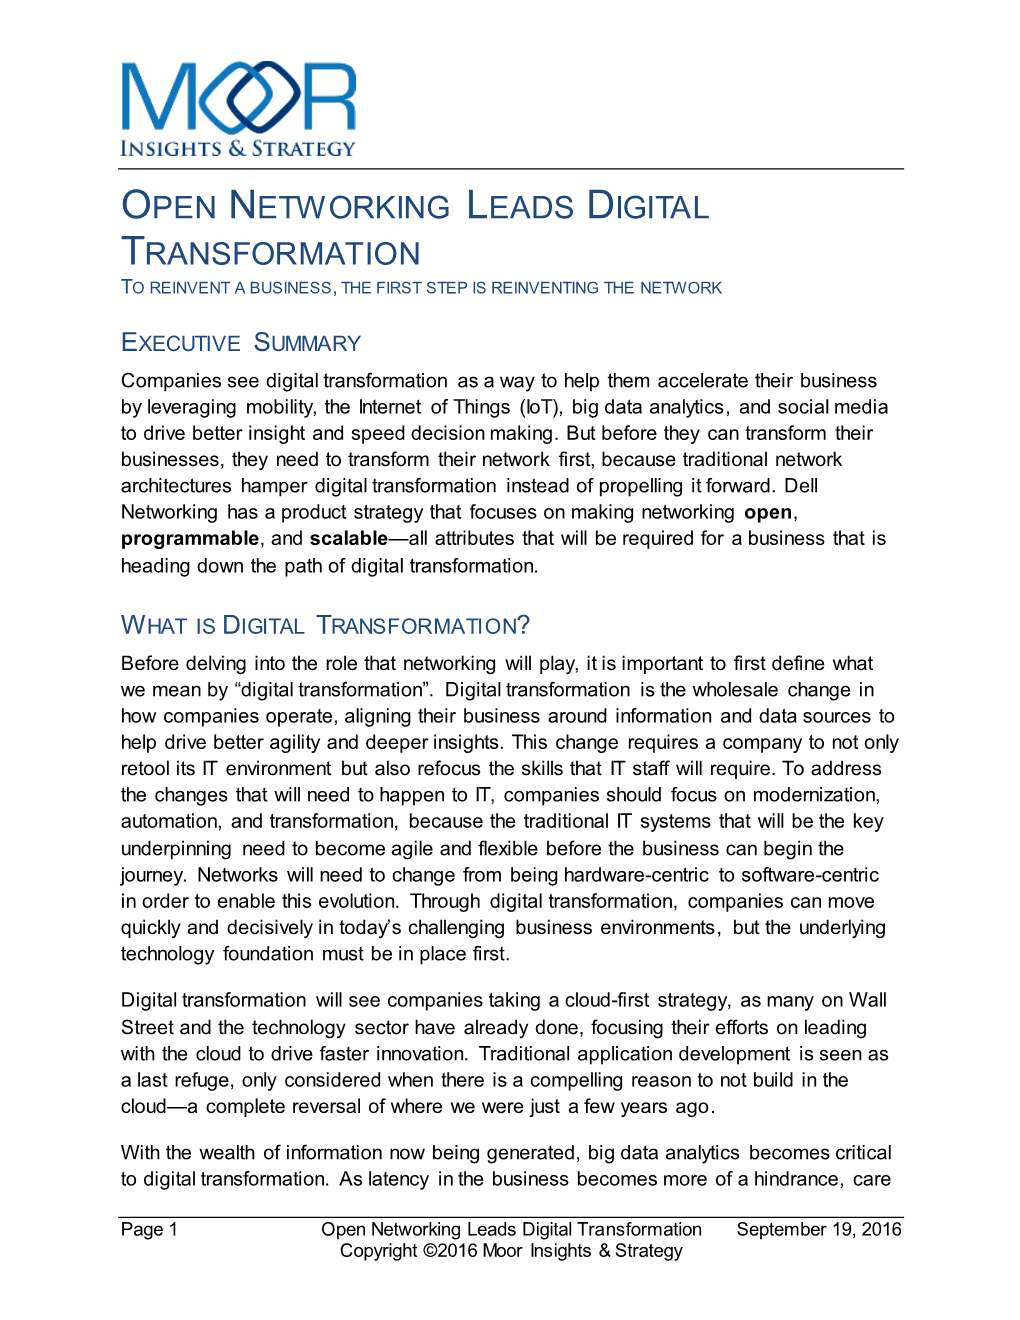 Open Networking Leads Digital Transformation to Reinvent a Business, the First Step Is Reinventing the Network